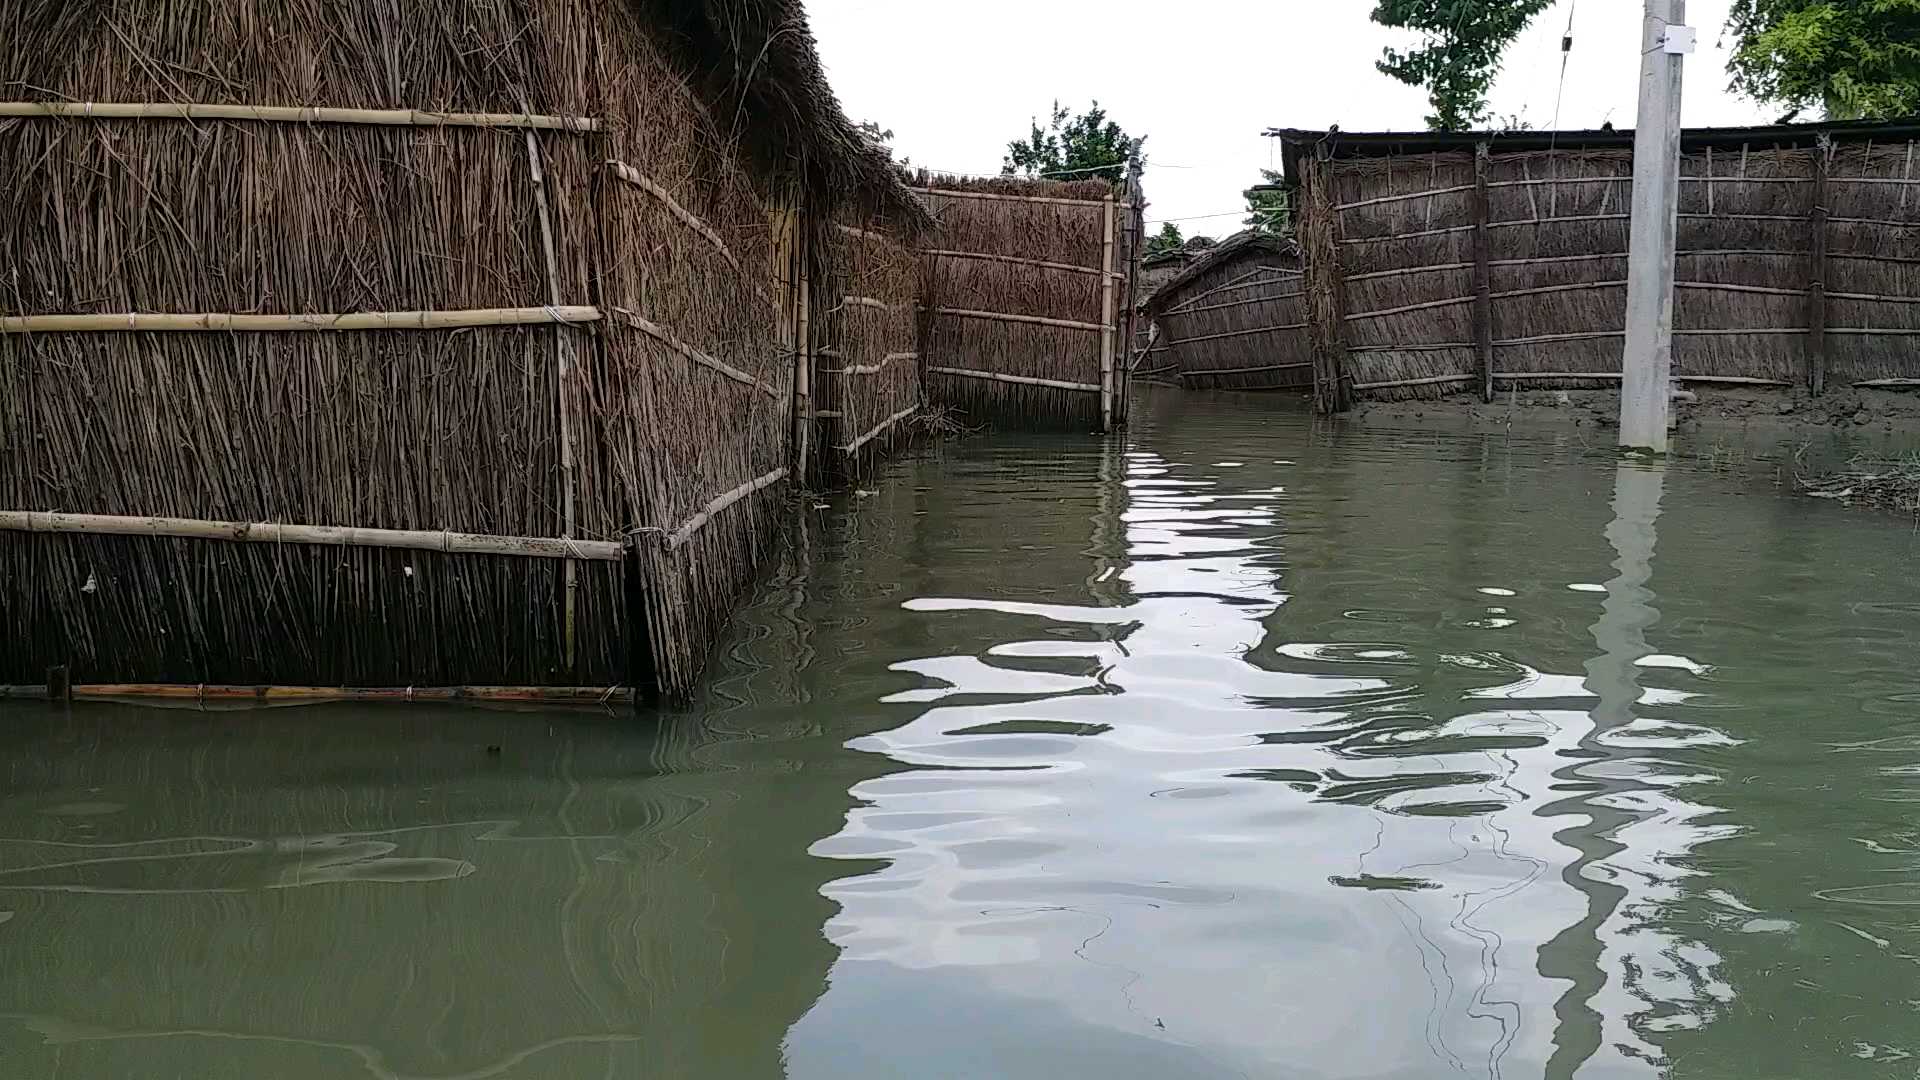 Flood victims are deprived of government assistance in Gopalganj